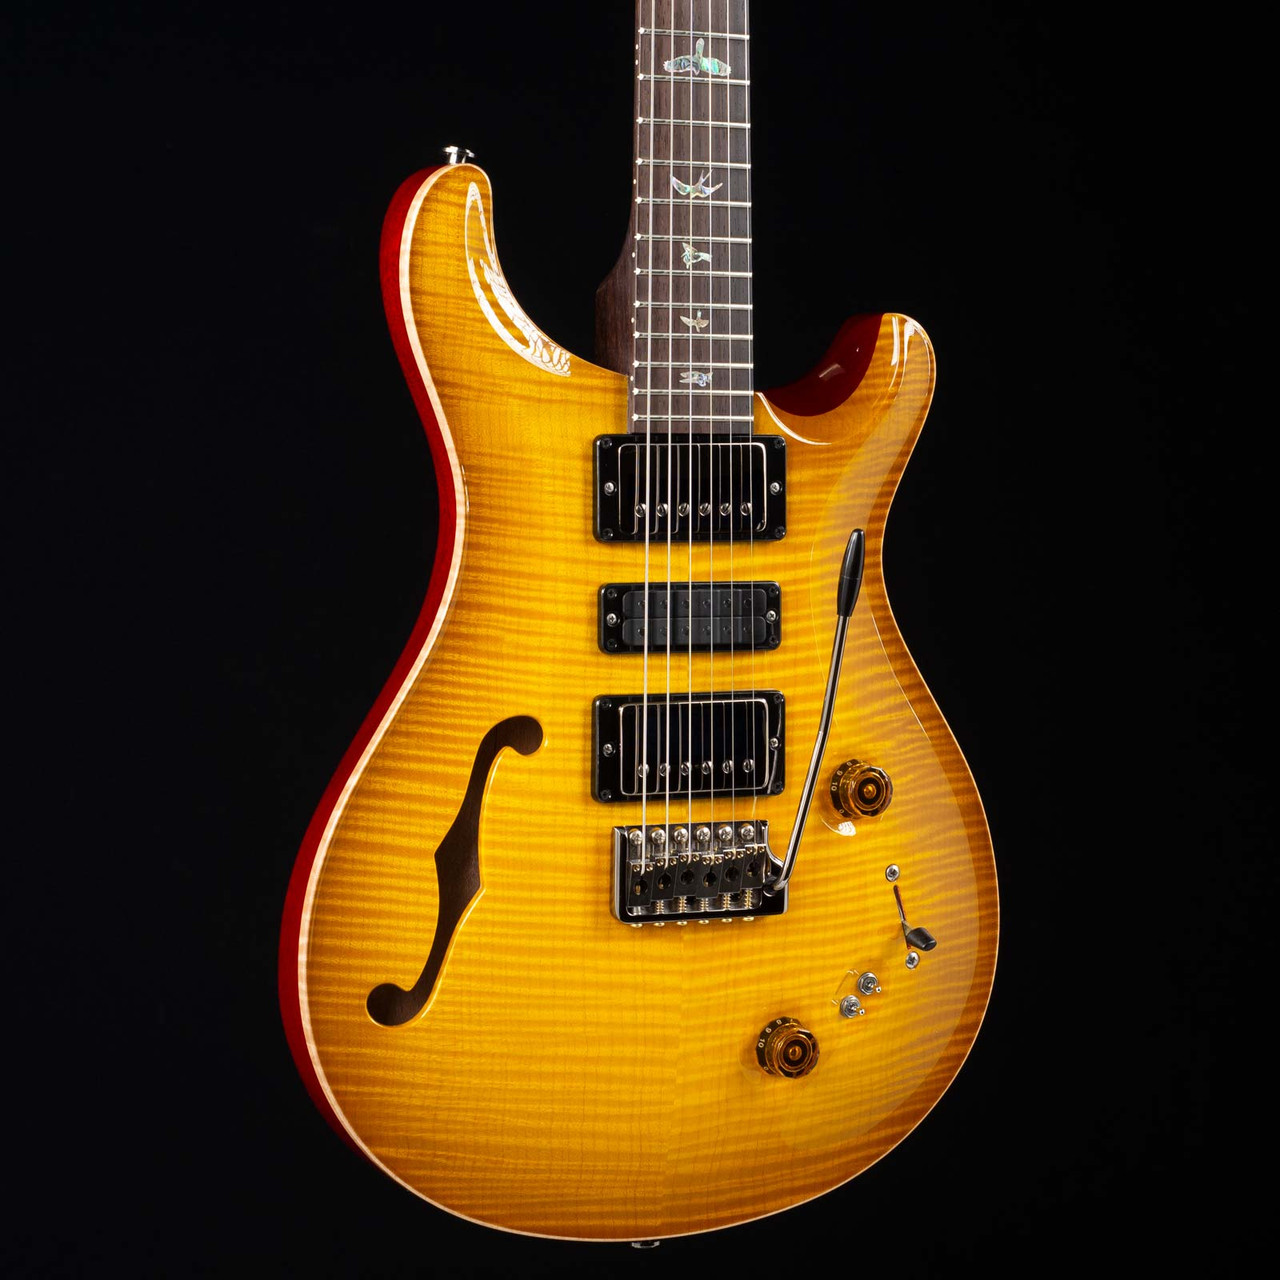 PRS-SPECIAL-22-10-SEMI-HOLLOW-MCCARTY-SB---281960-angle-left__32213.1576769805.jpg